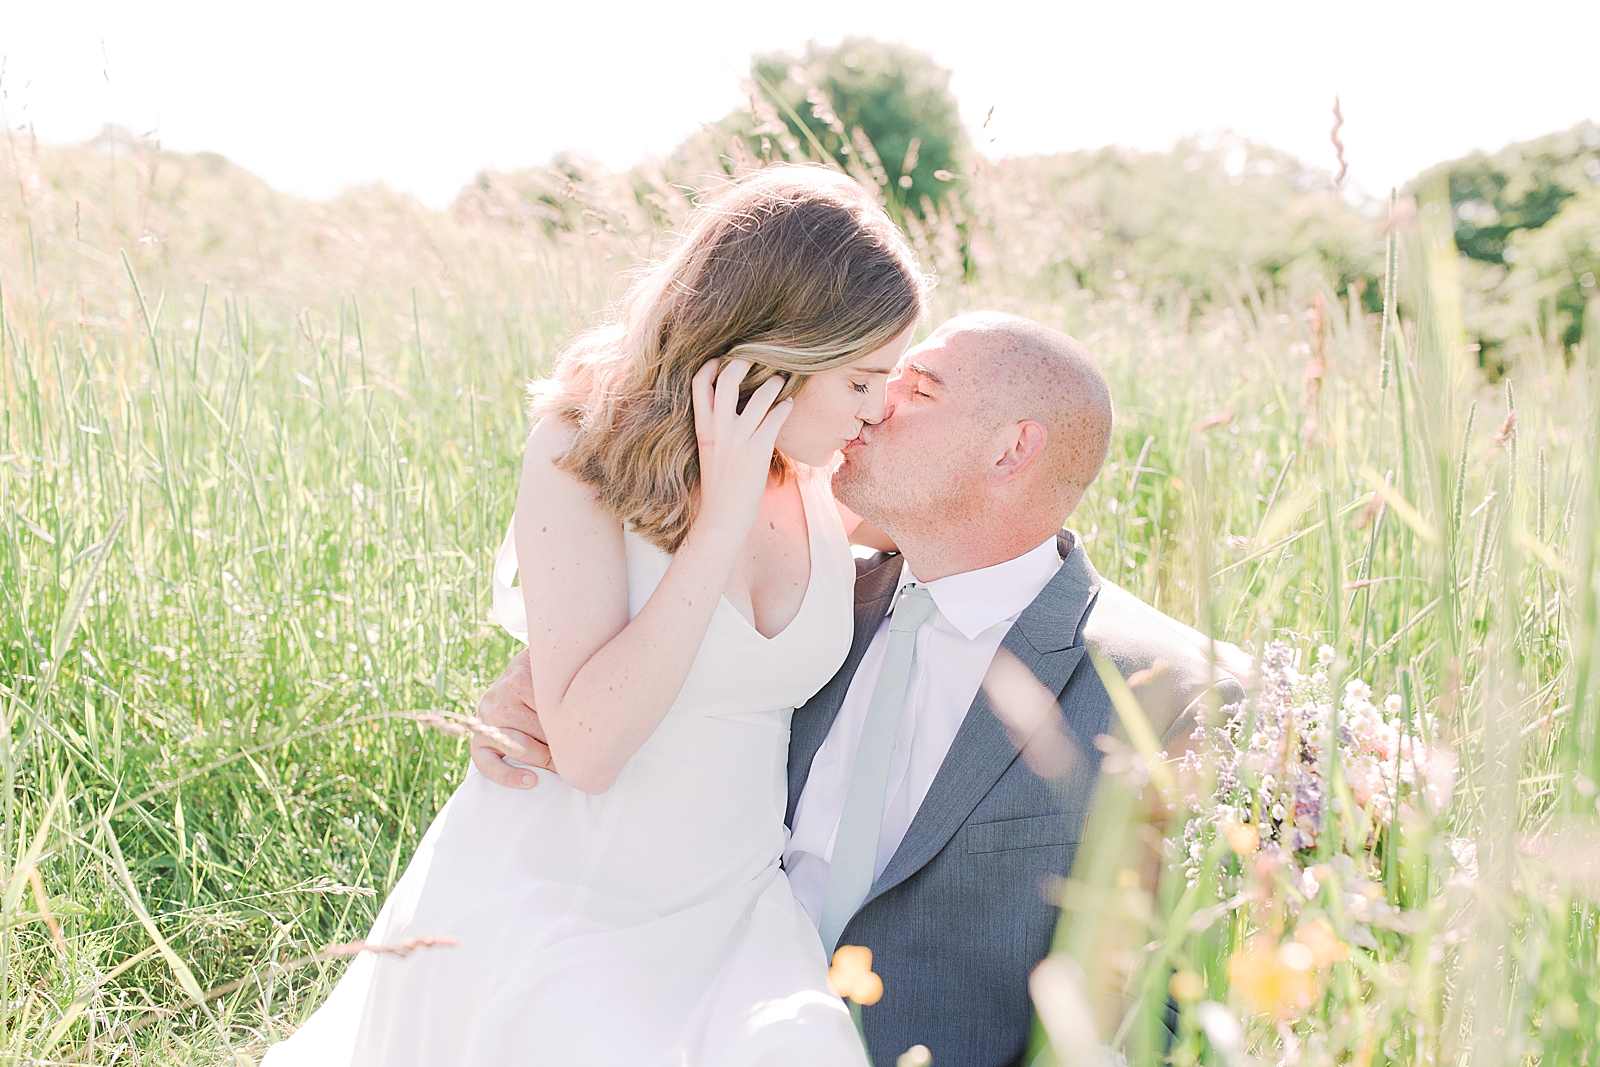 Max Patch Elopement Bride and Groom Sitting and Kissing in Tall Grass Photo